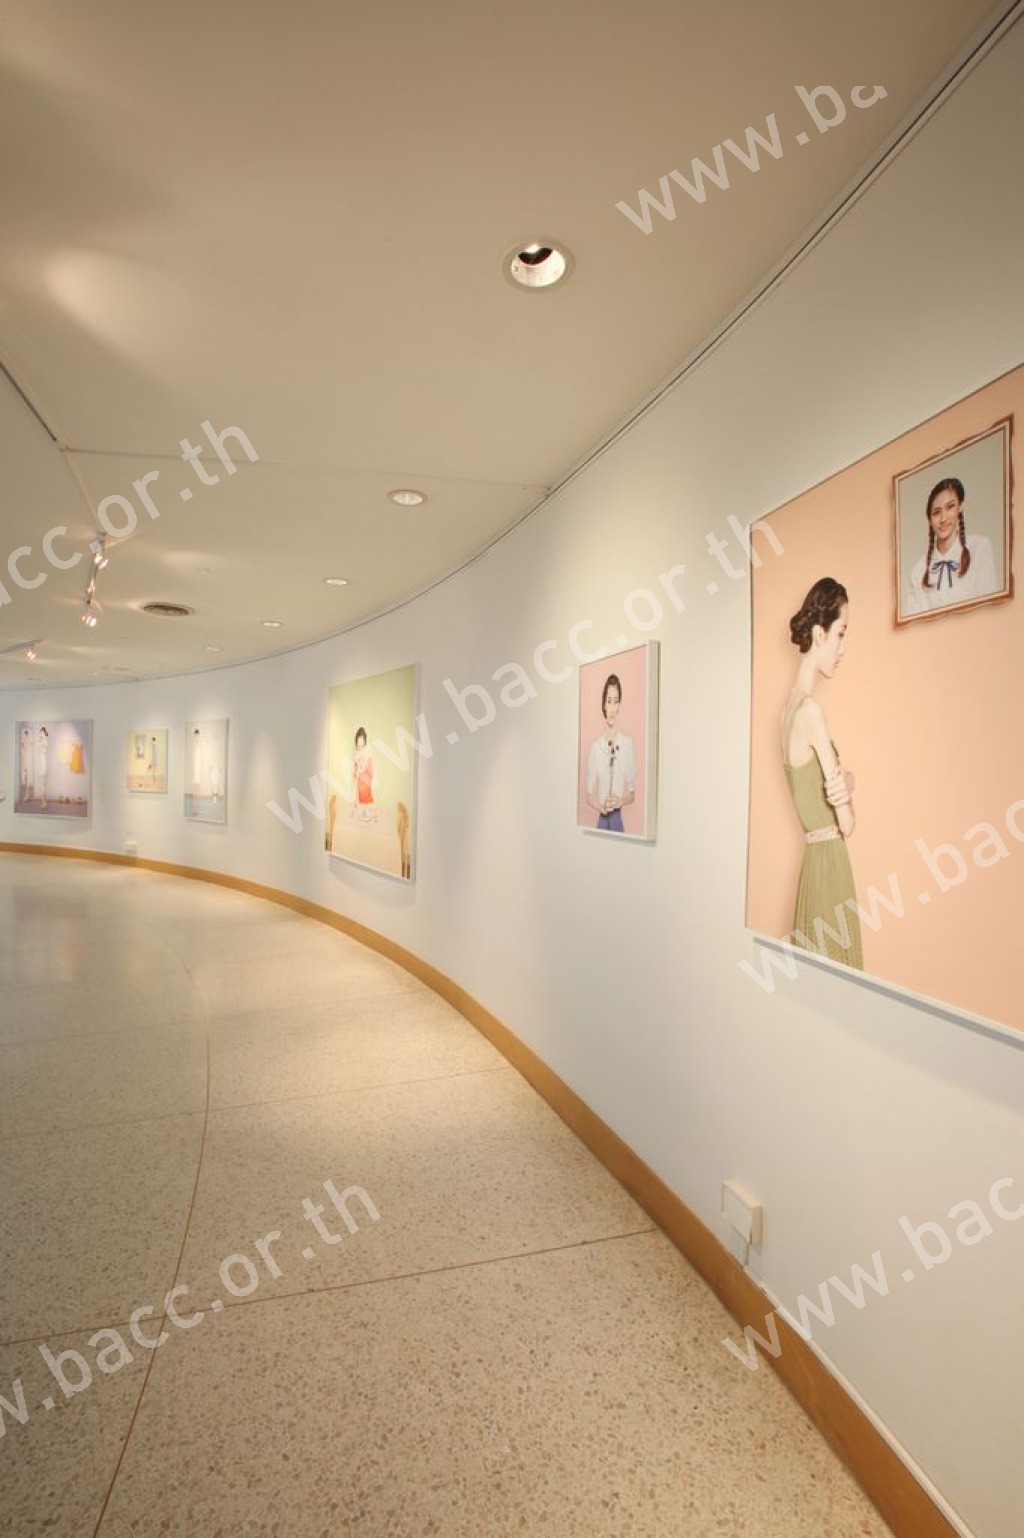 BACC Photo Picture Perfect : A Photography Series Exhibition Part I : 3 Women